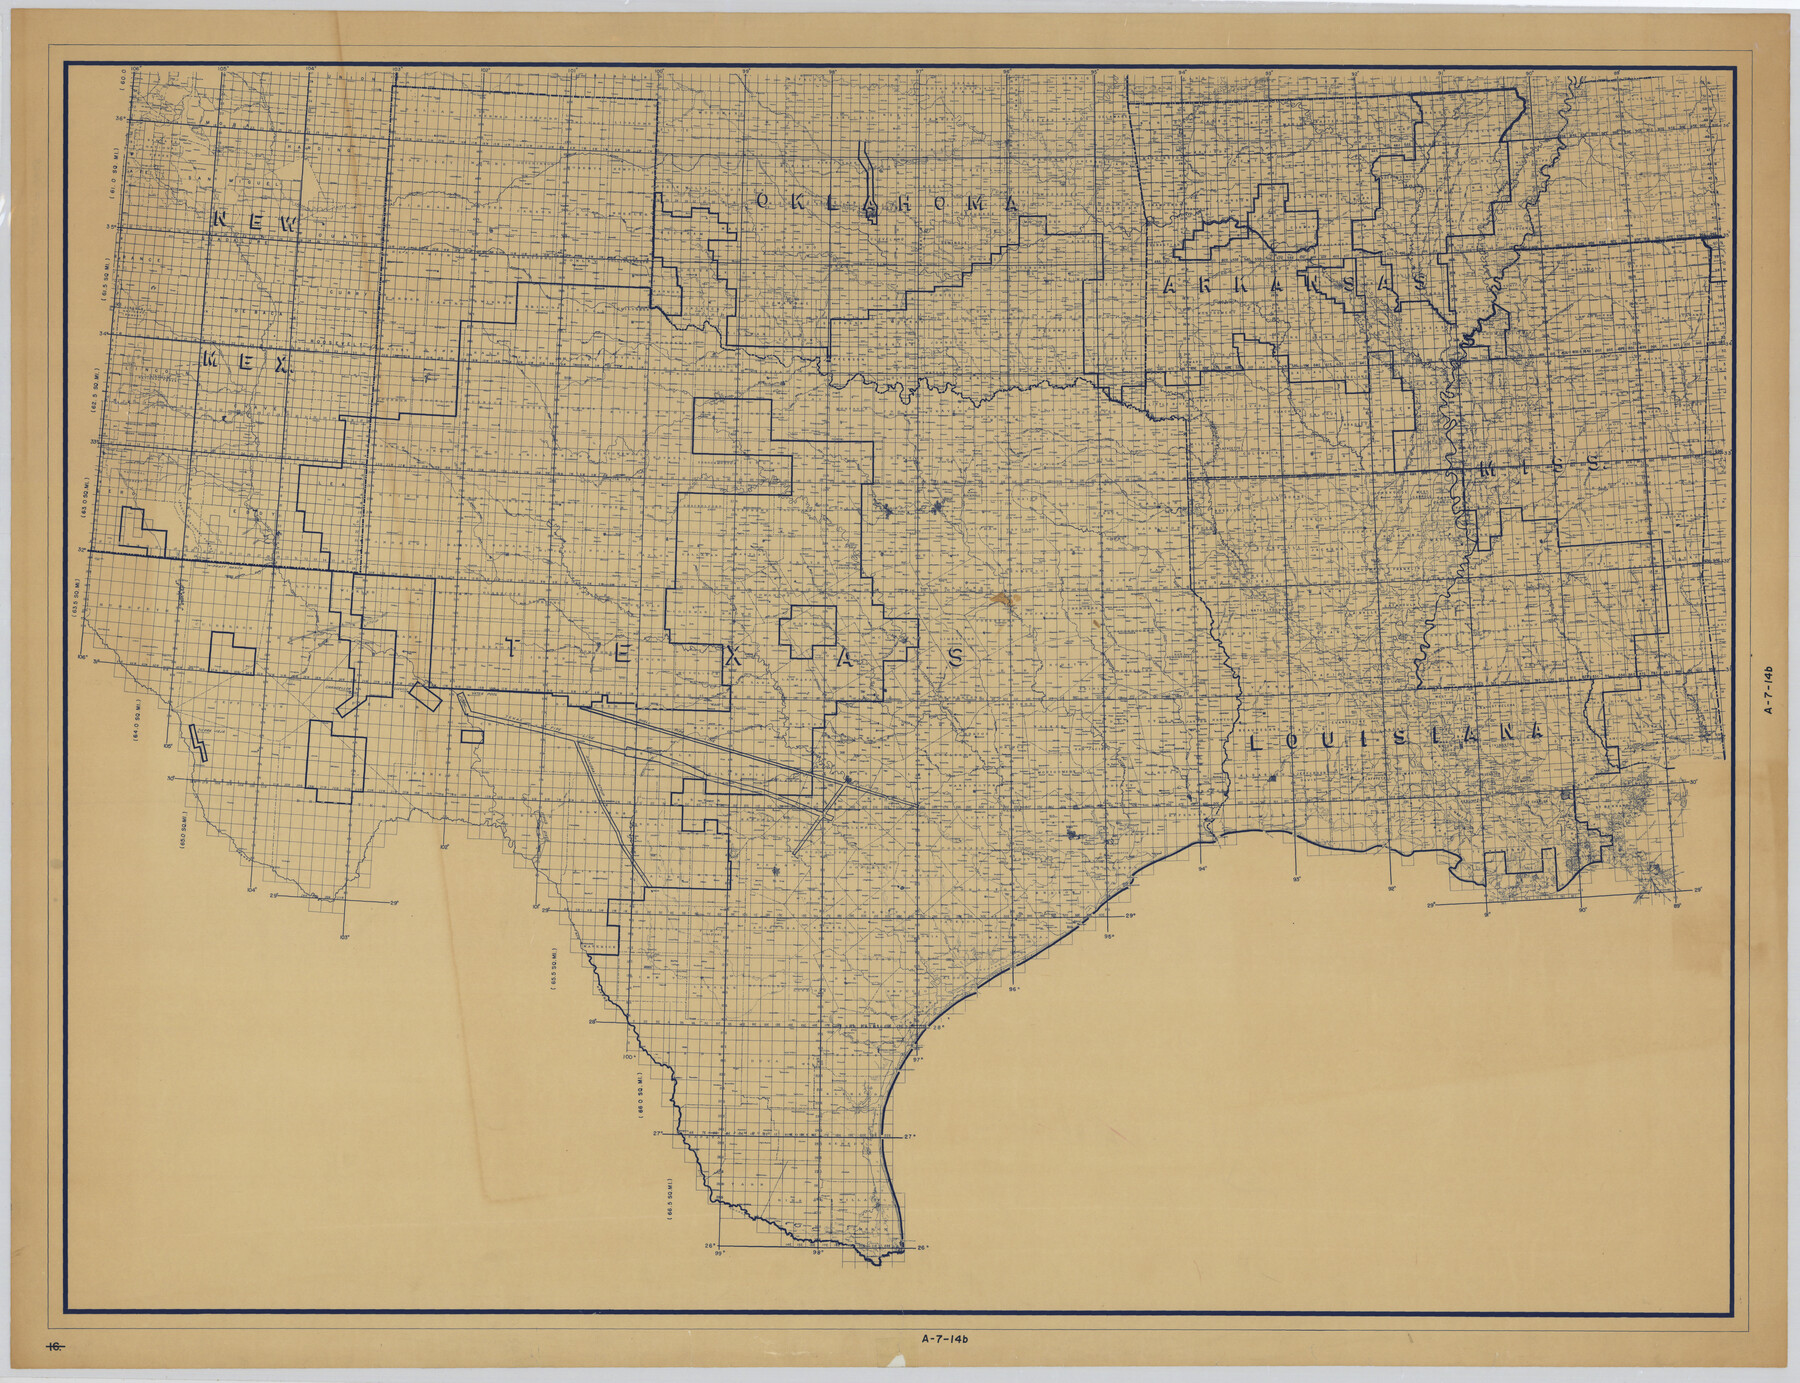 Grid Map Showing Texas, Louisiana, Arkansas, Mississippi and